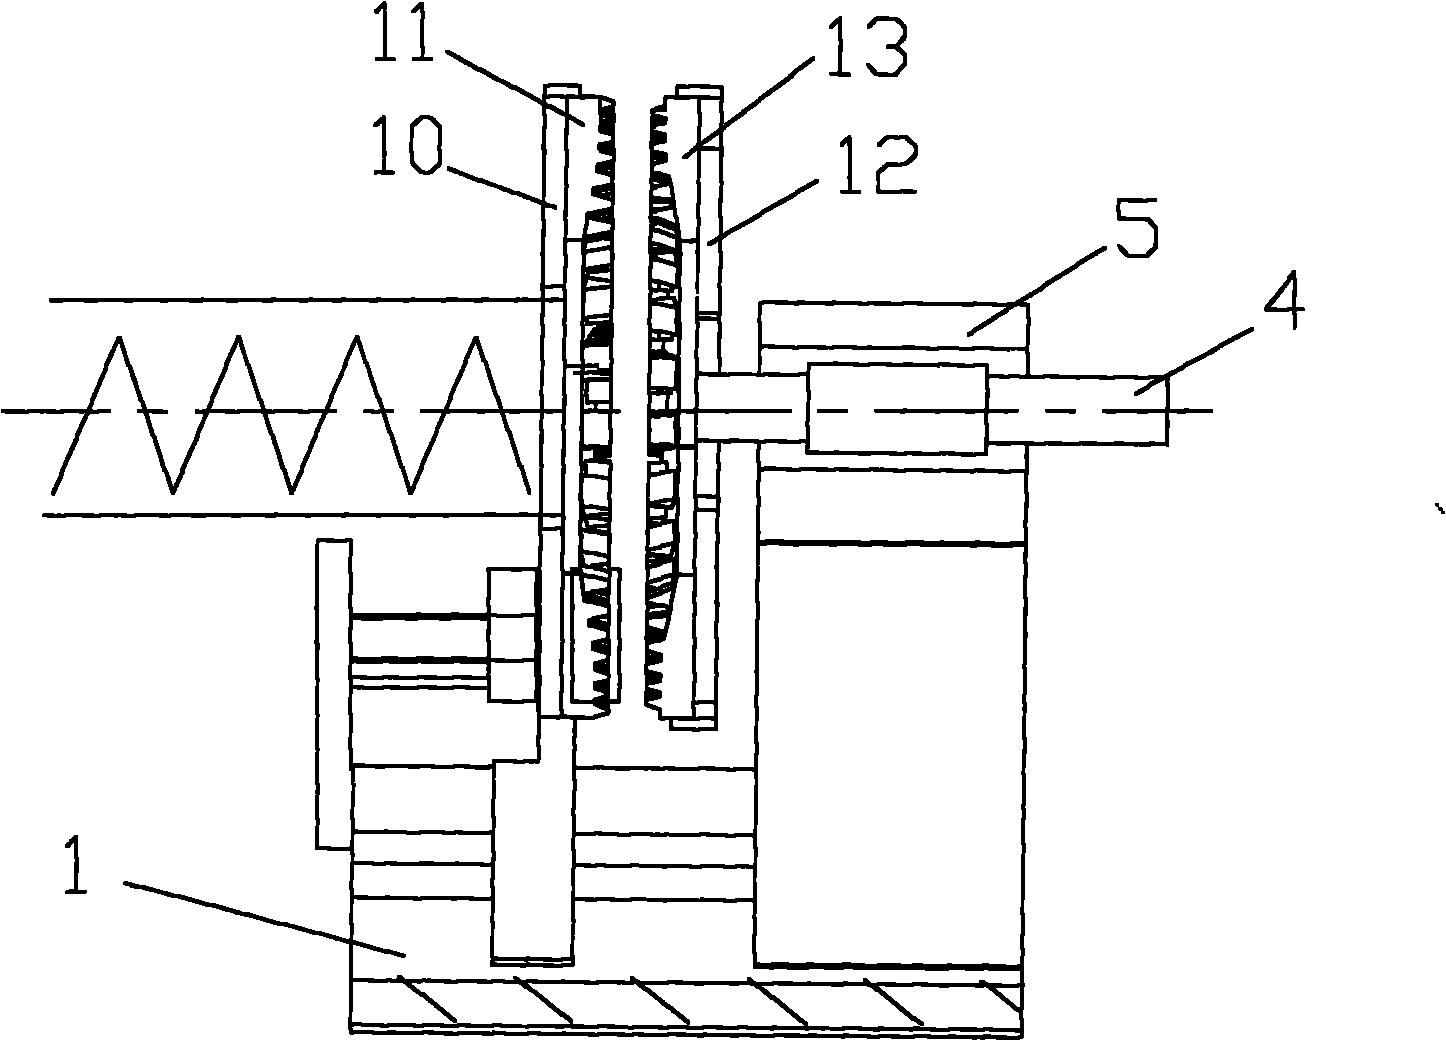 Visual experimental equipment and visual experimental method for researching dispersing action mechanism of grinding sheet